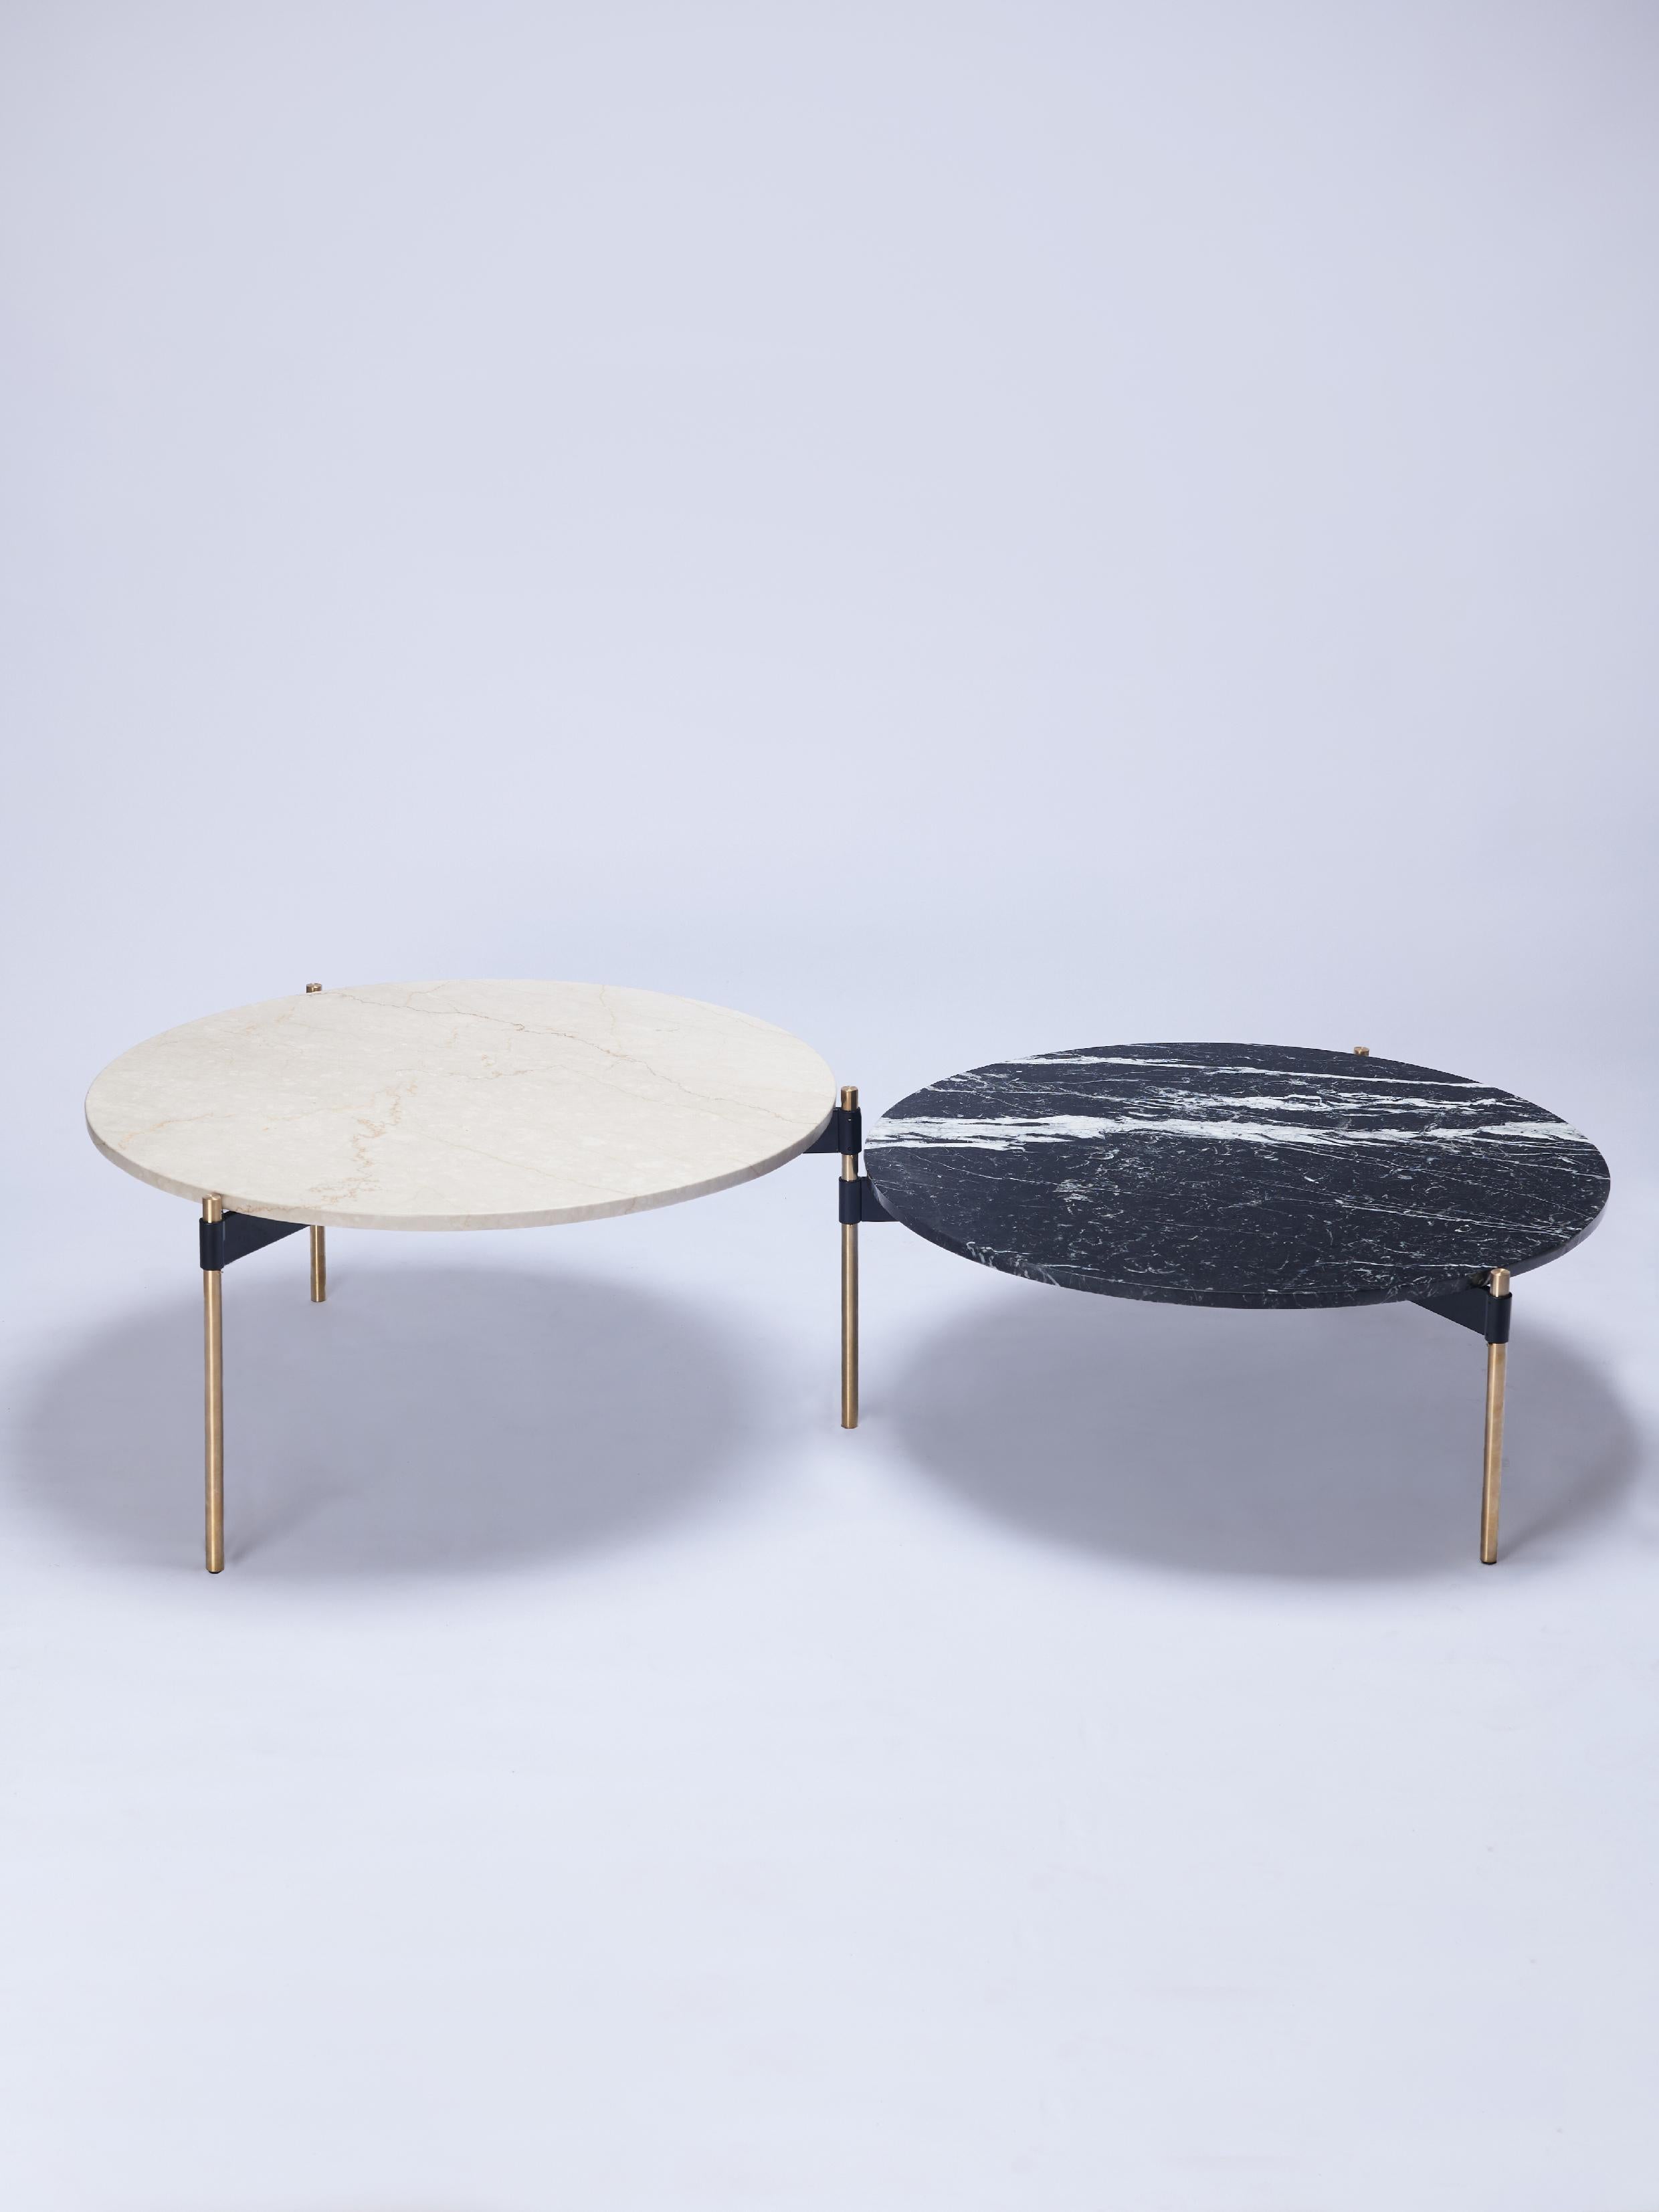 Moon is a single coffee table conformed by three round tops, which by rotating on the axis of the leg they share with its adjacent top, allows different configurations to be formed.

This version of the table features different marble top types,